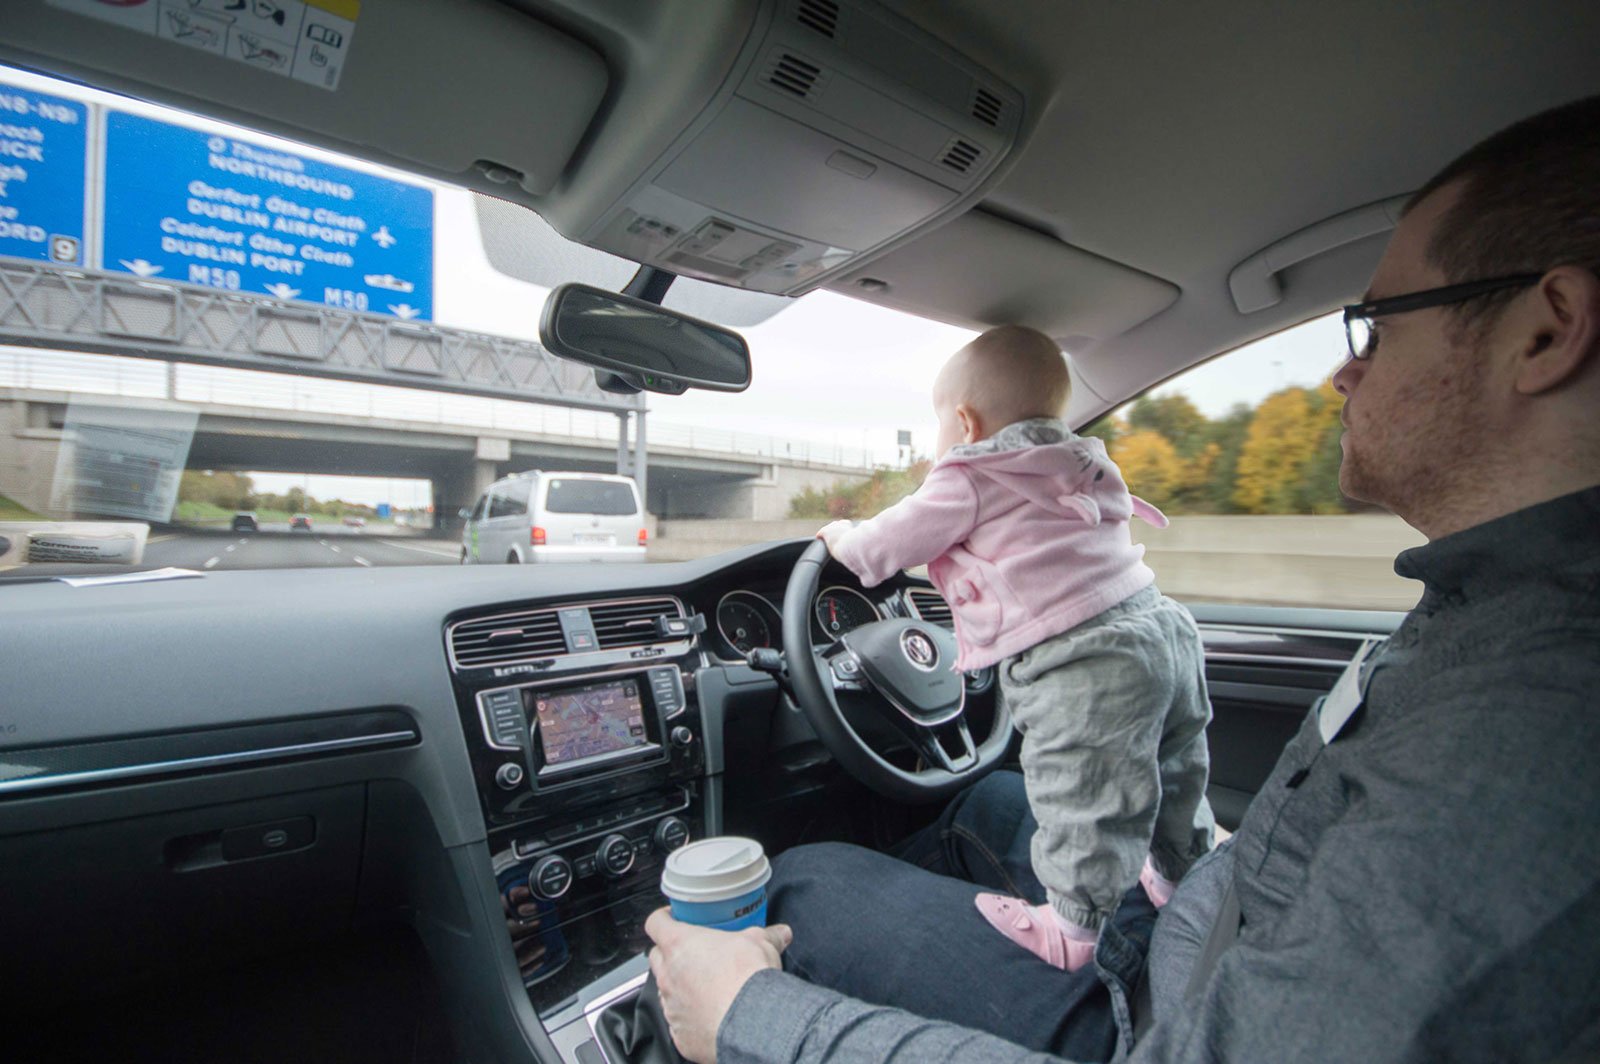 Dad Photoshops Baby Into Dangerous Situations to Freak Out Relatives